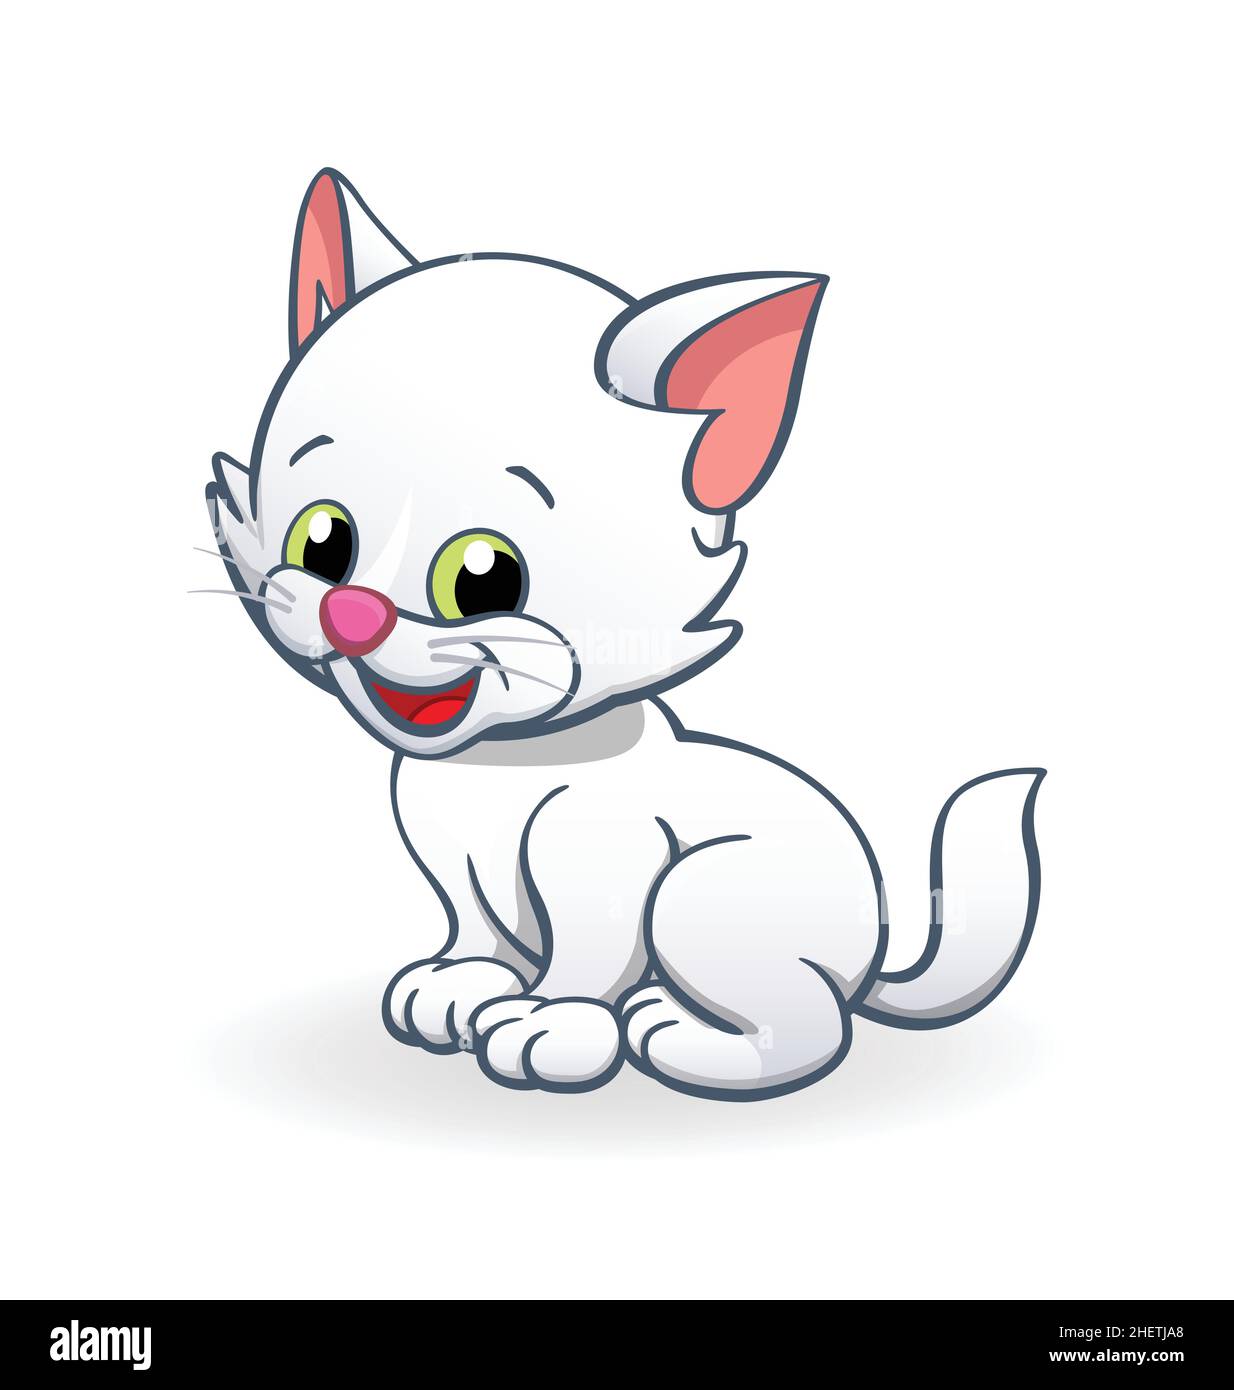 Cute smiling cartoon white kitten cat character sitting vector isolated on white background Stock Vector